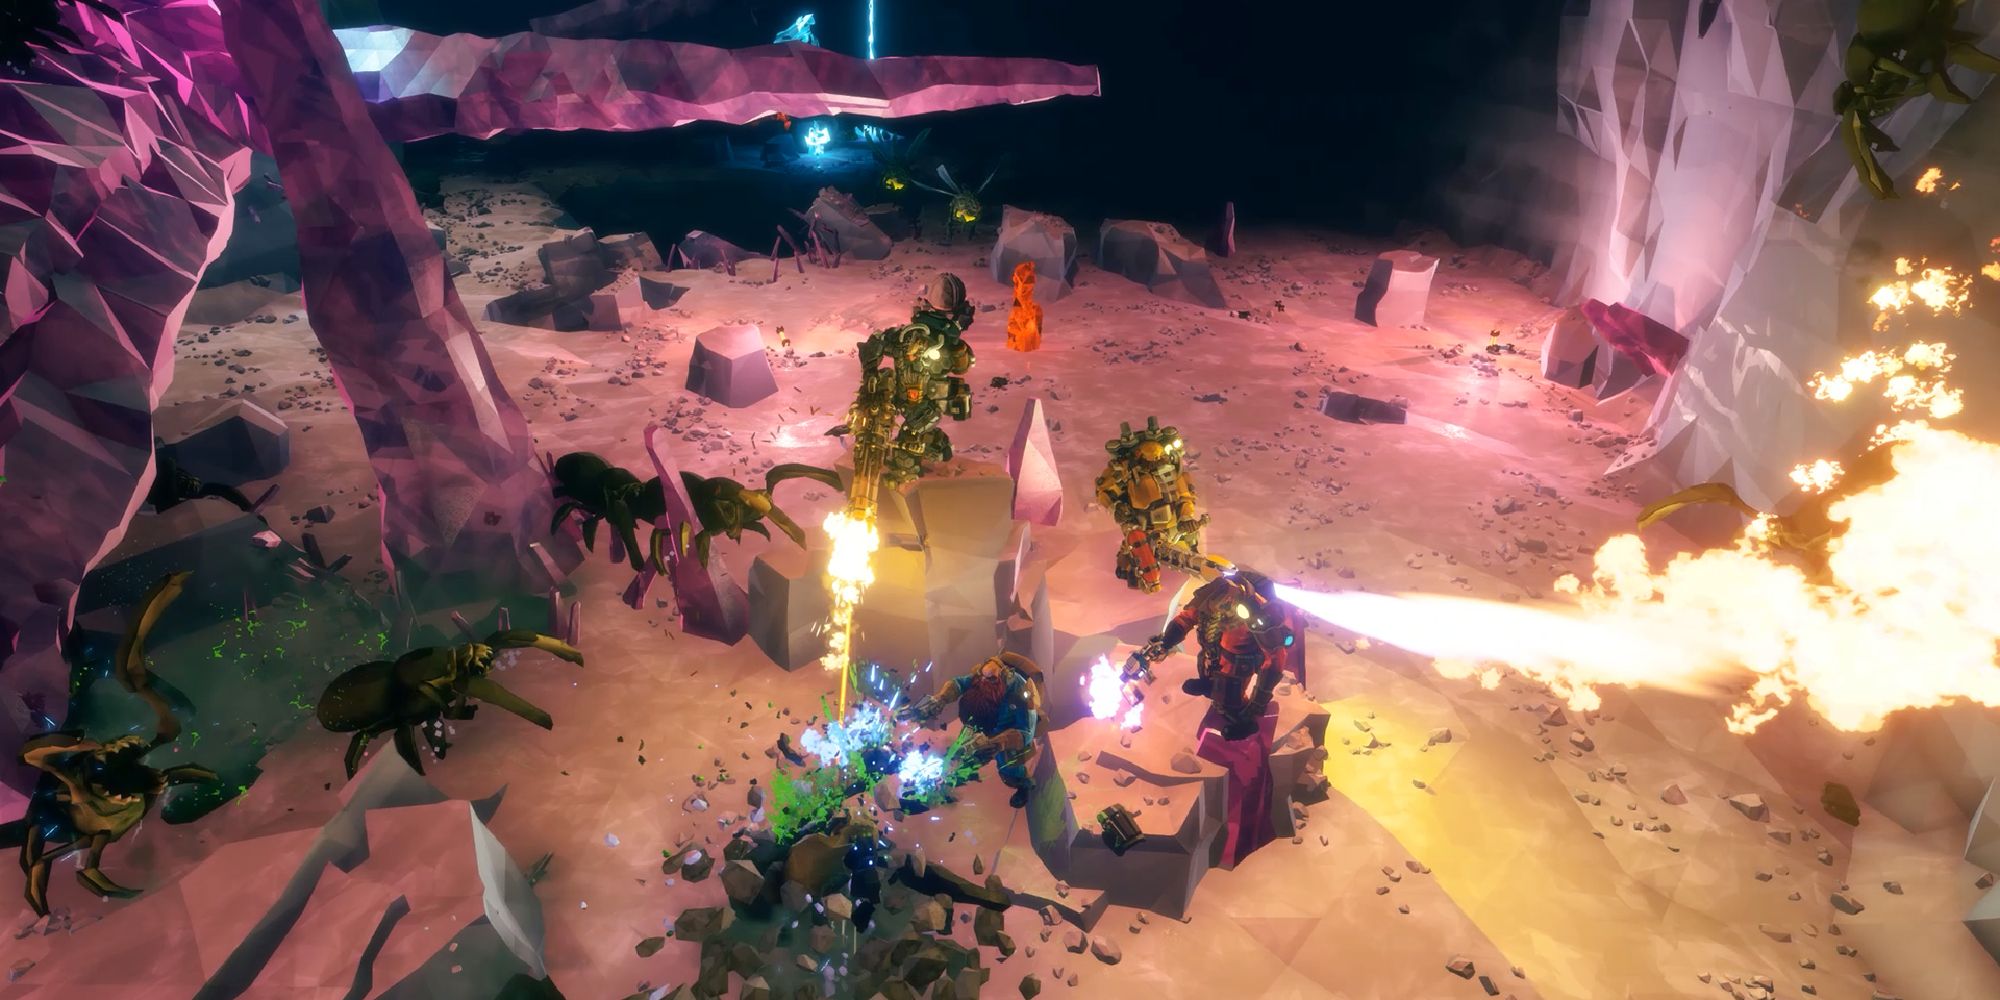 Screenshot showing the combat and monsters from Deep Rock Galatic